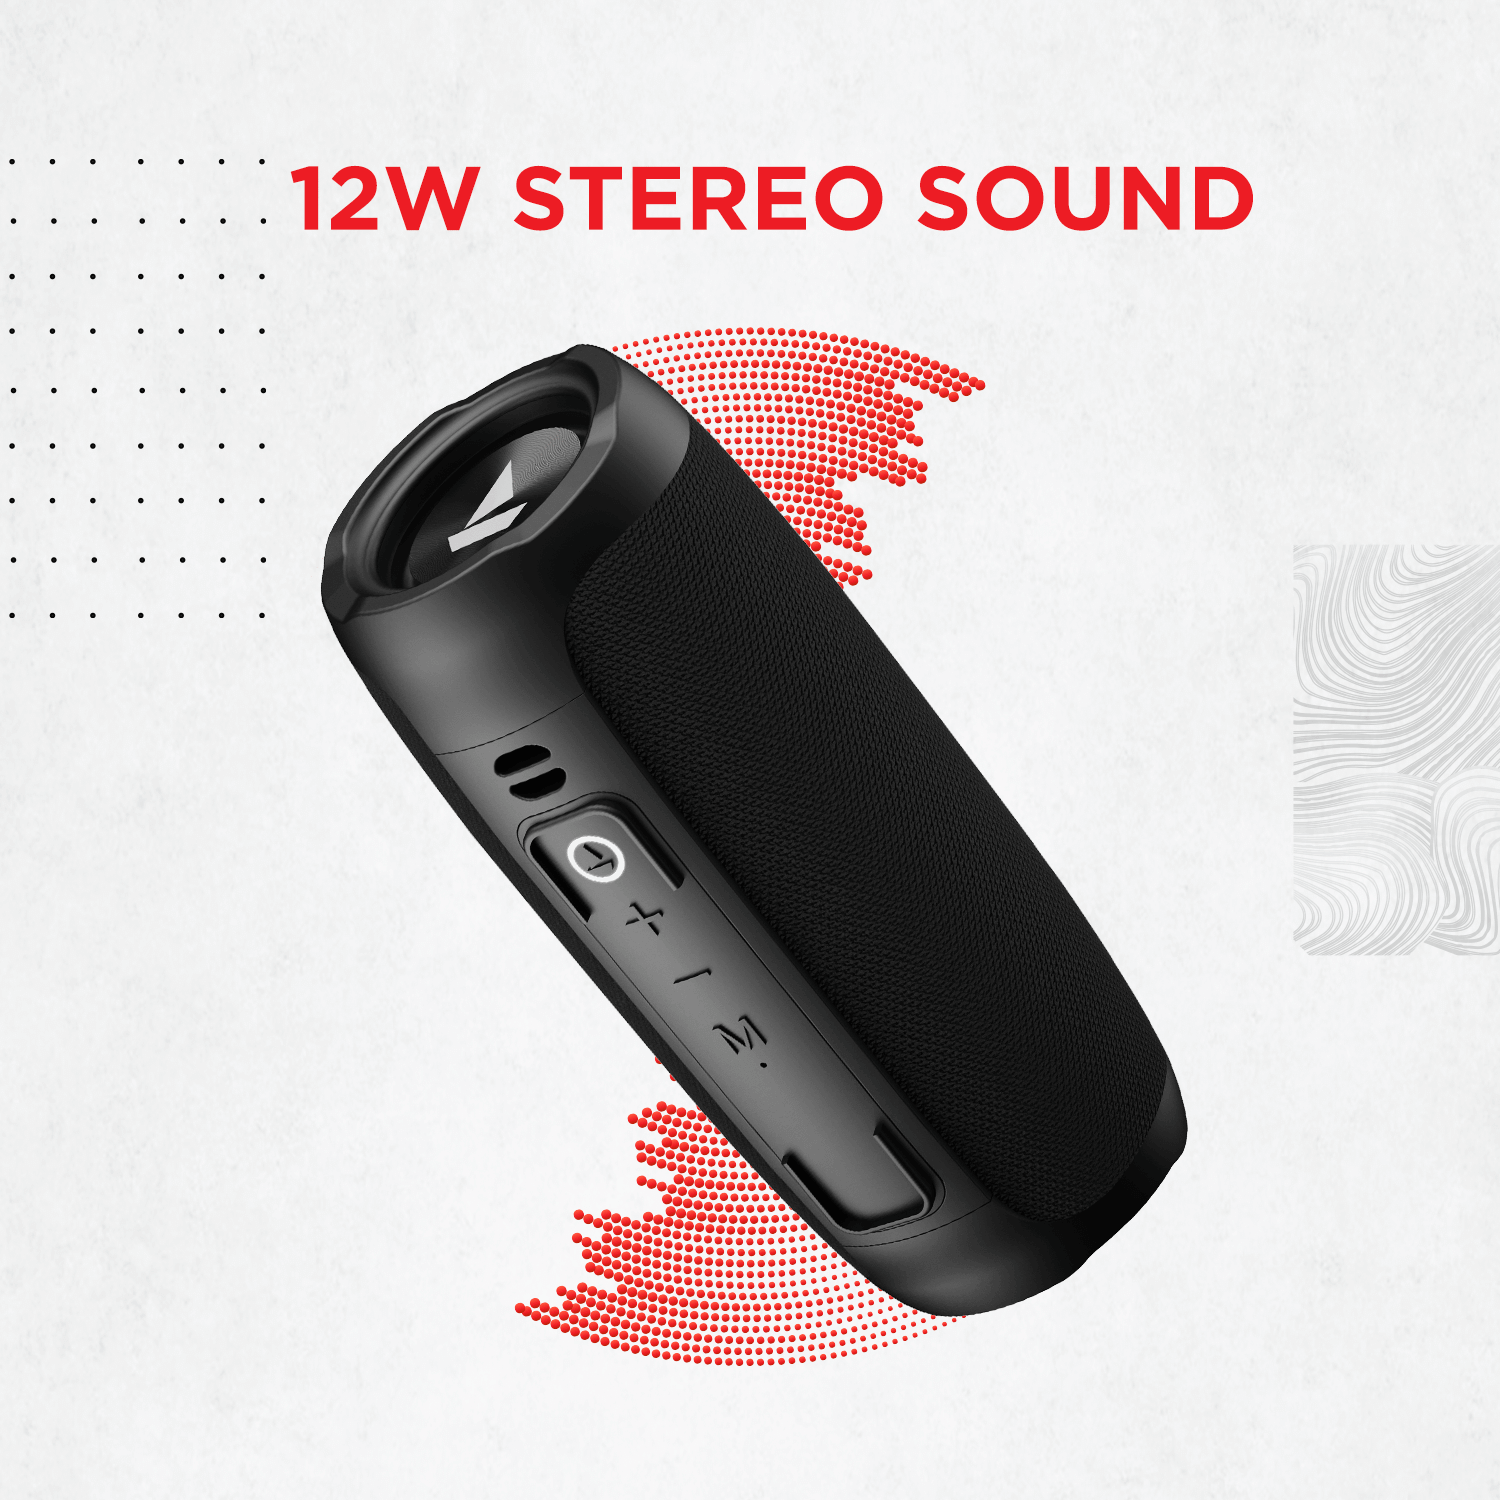 boAt Stone 620 | Portable Bluetooth Speaker with 12W Stereo Sound, Upto 10 Hours, Bluetooth v5.0 + AUX, USB